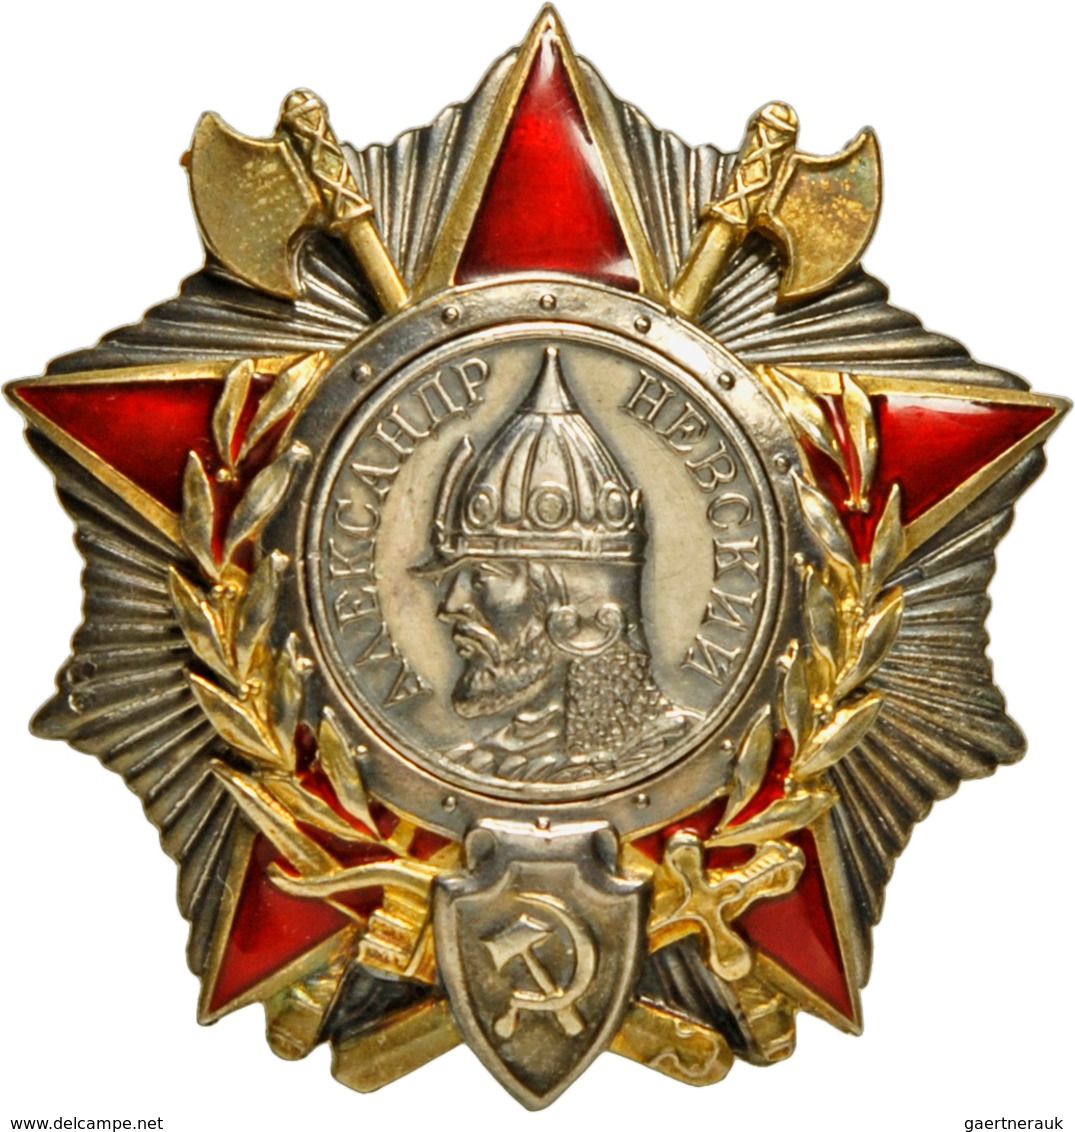 Russland: Russia: Collection of Soviet Orders, Medals and Badges "Polnyj Kavaler" The origin of this